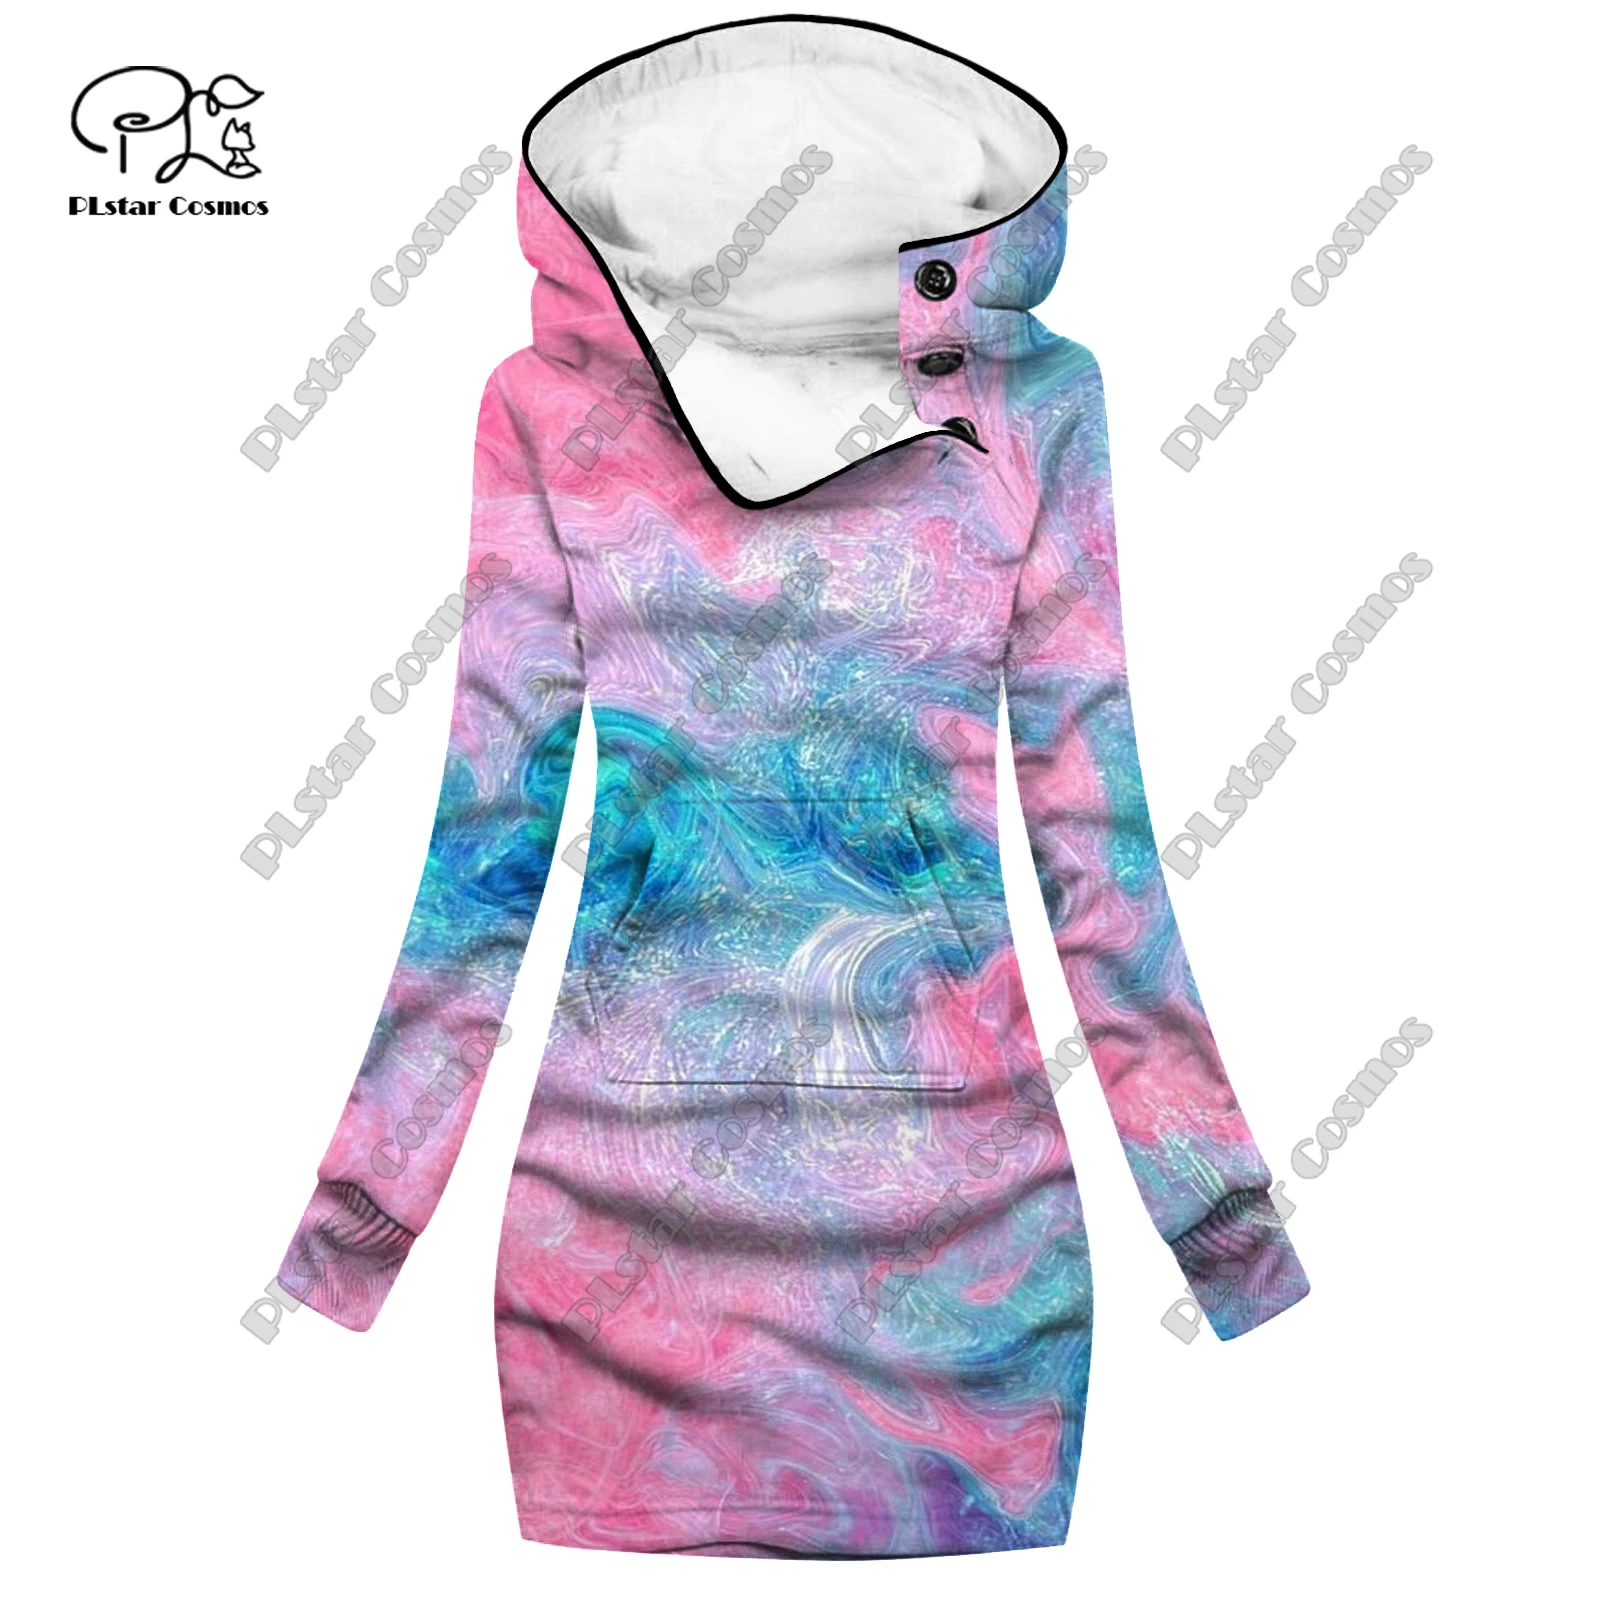 PLstar Cosmos 3D printing women's colorful quicksand landscape gradient pattern open-top sweater dress casual slimming series J3